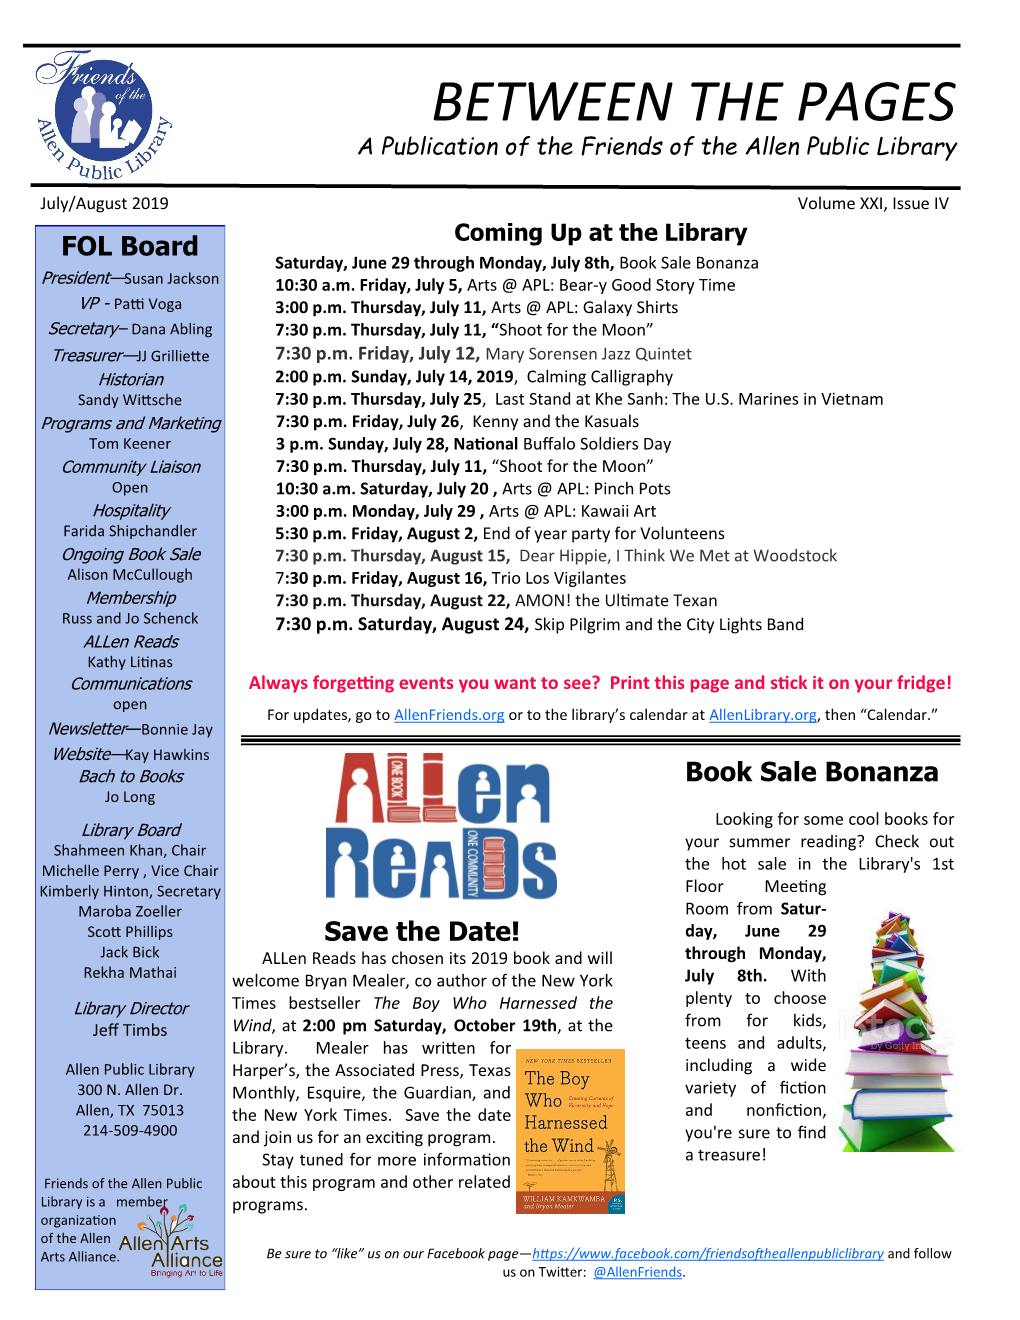 BETWEEN the PAGES a Publication of the Friends of the Allen Public Library